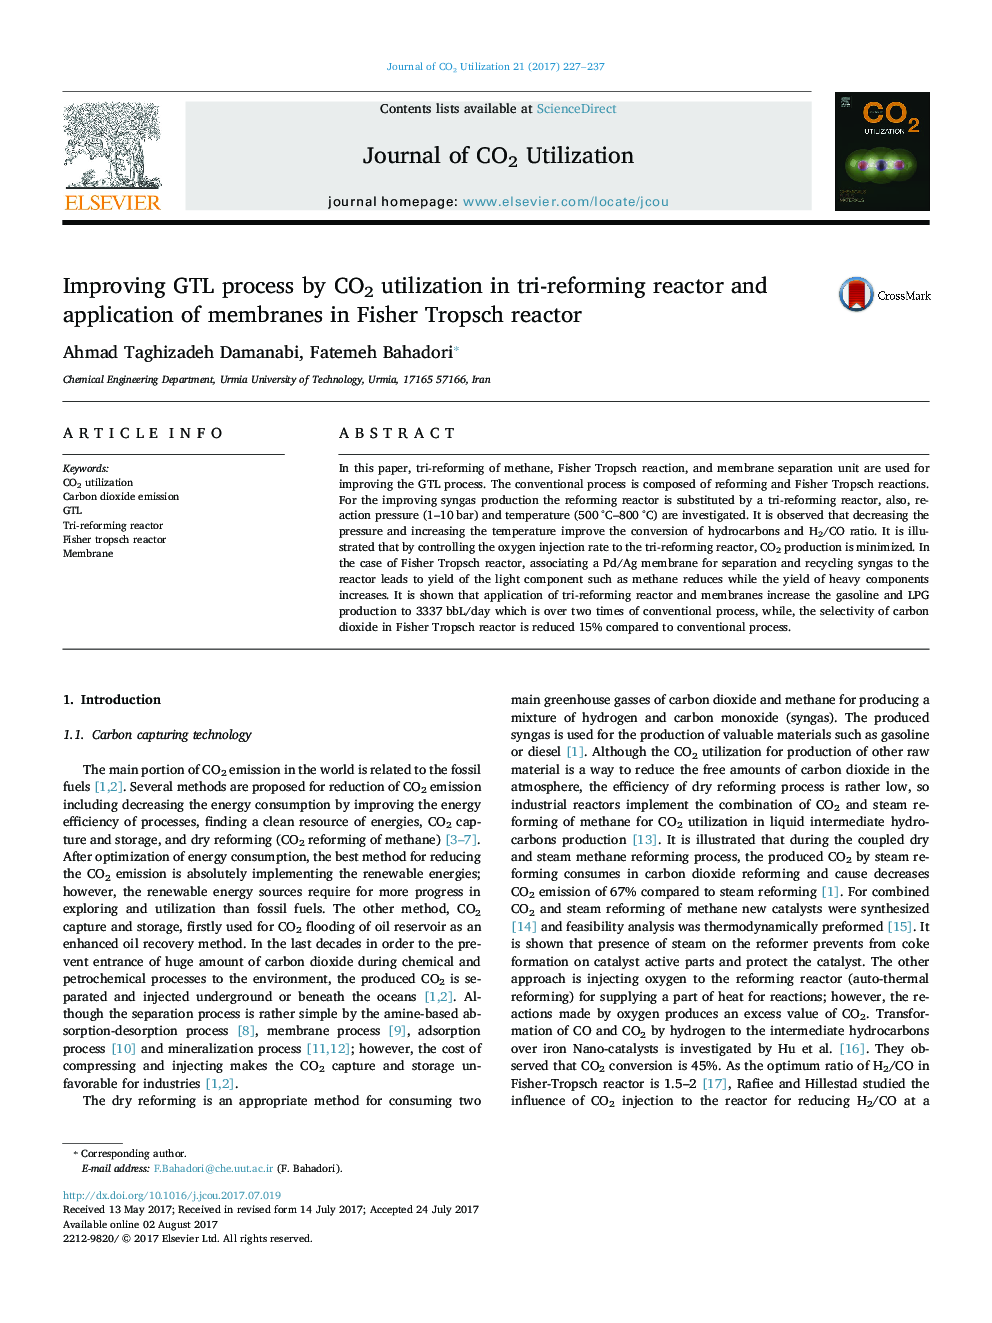 Improving GTL process by CO2 utilization in tri-reforming reactor and application of membranes in Fisher Tropsch reactor